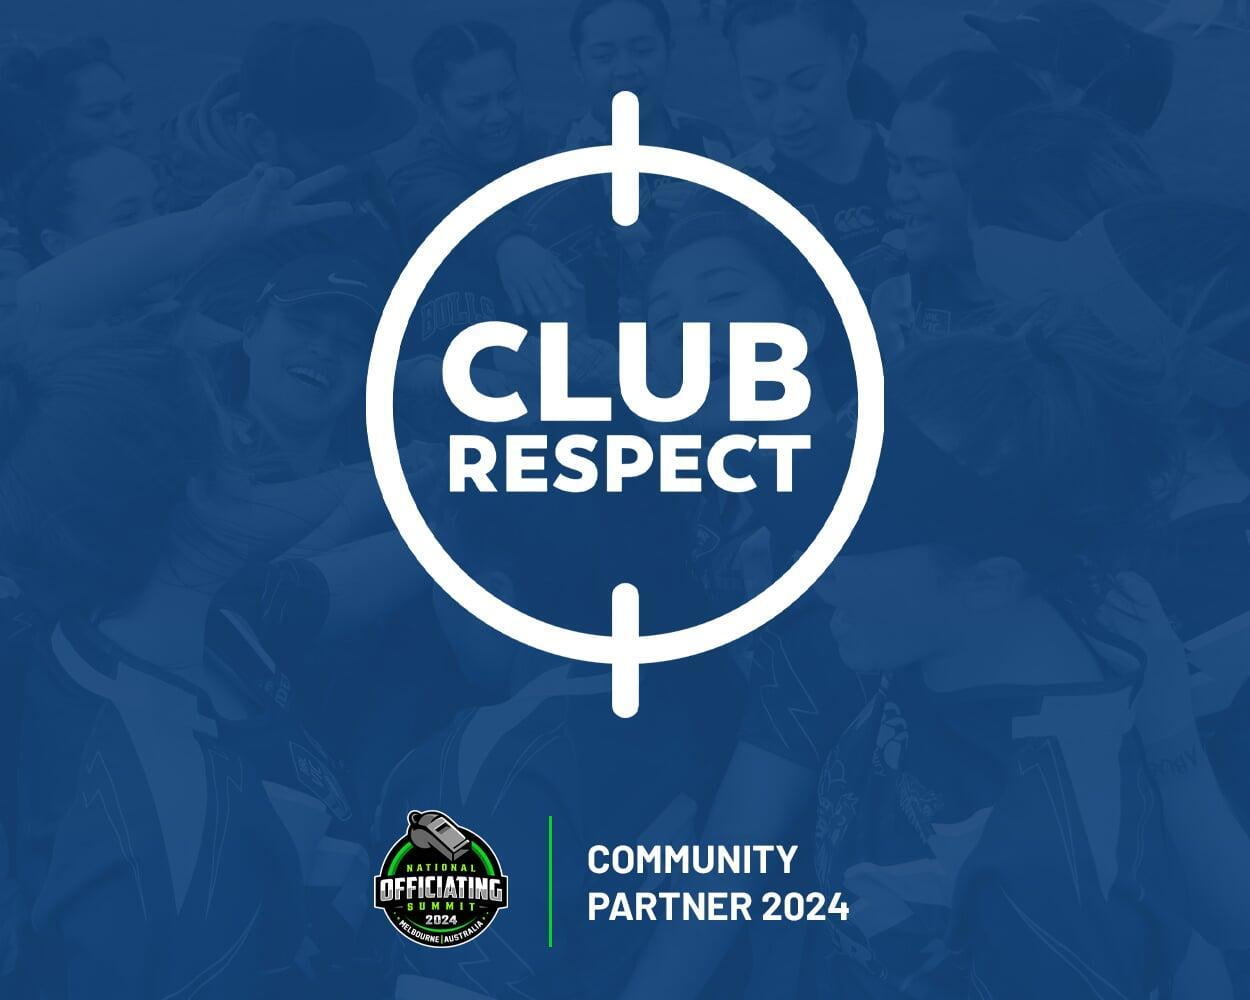 NATIONAL OFFICIATING SUMMIT PARTNERS WITH CLUB RESPECT